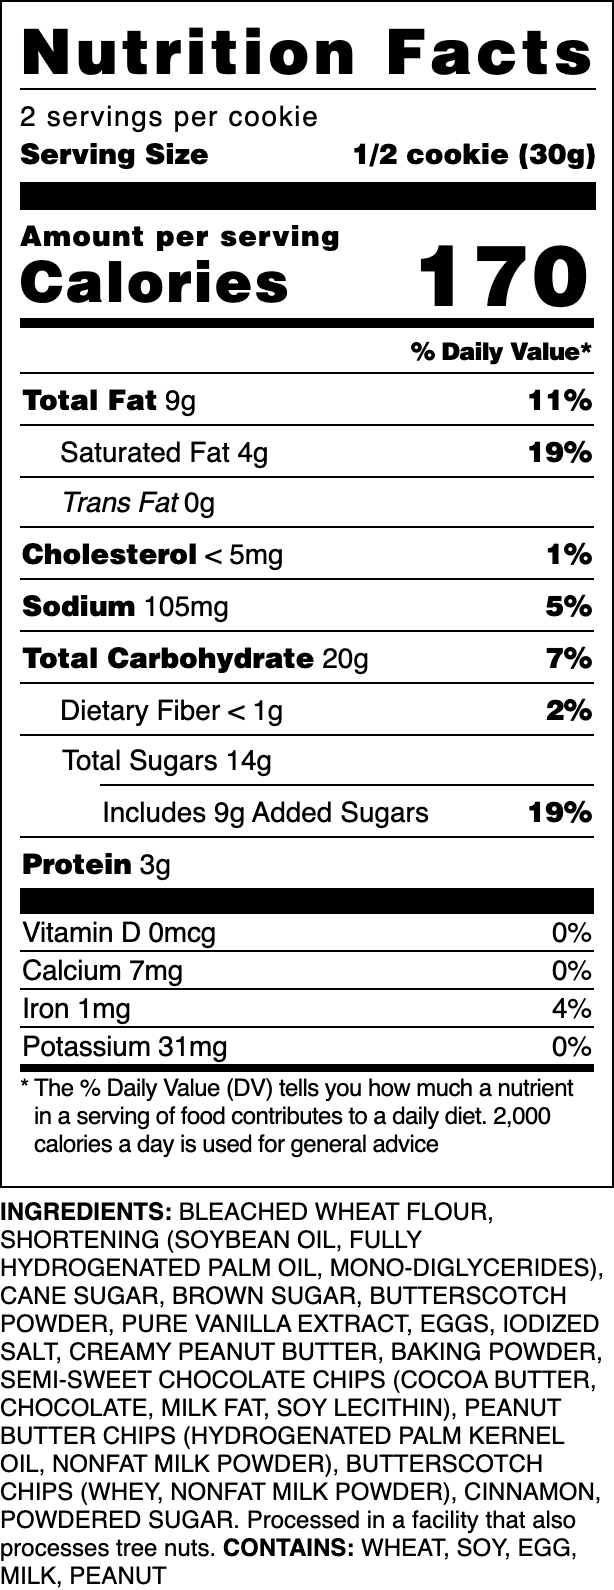 Nutrition label for our Trio cookie.